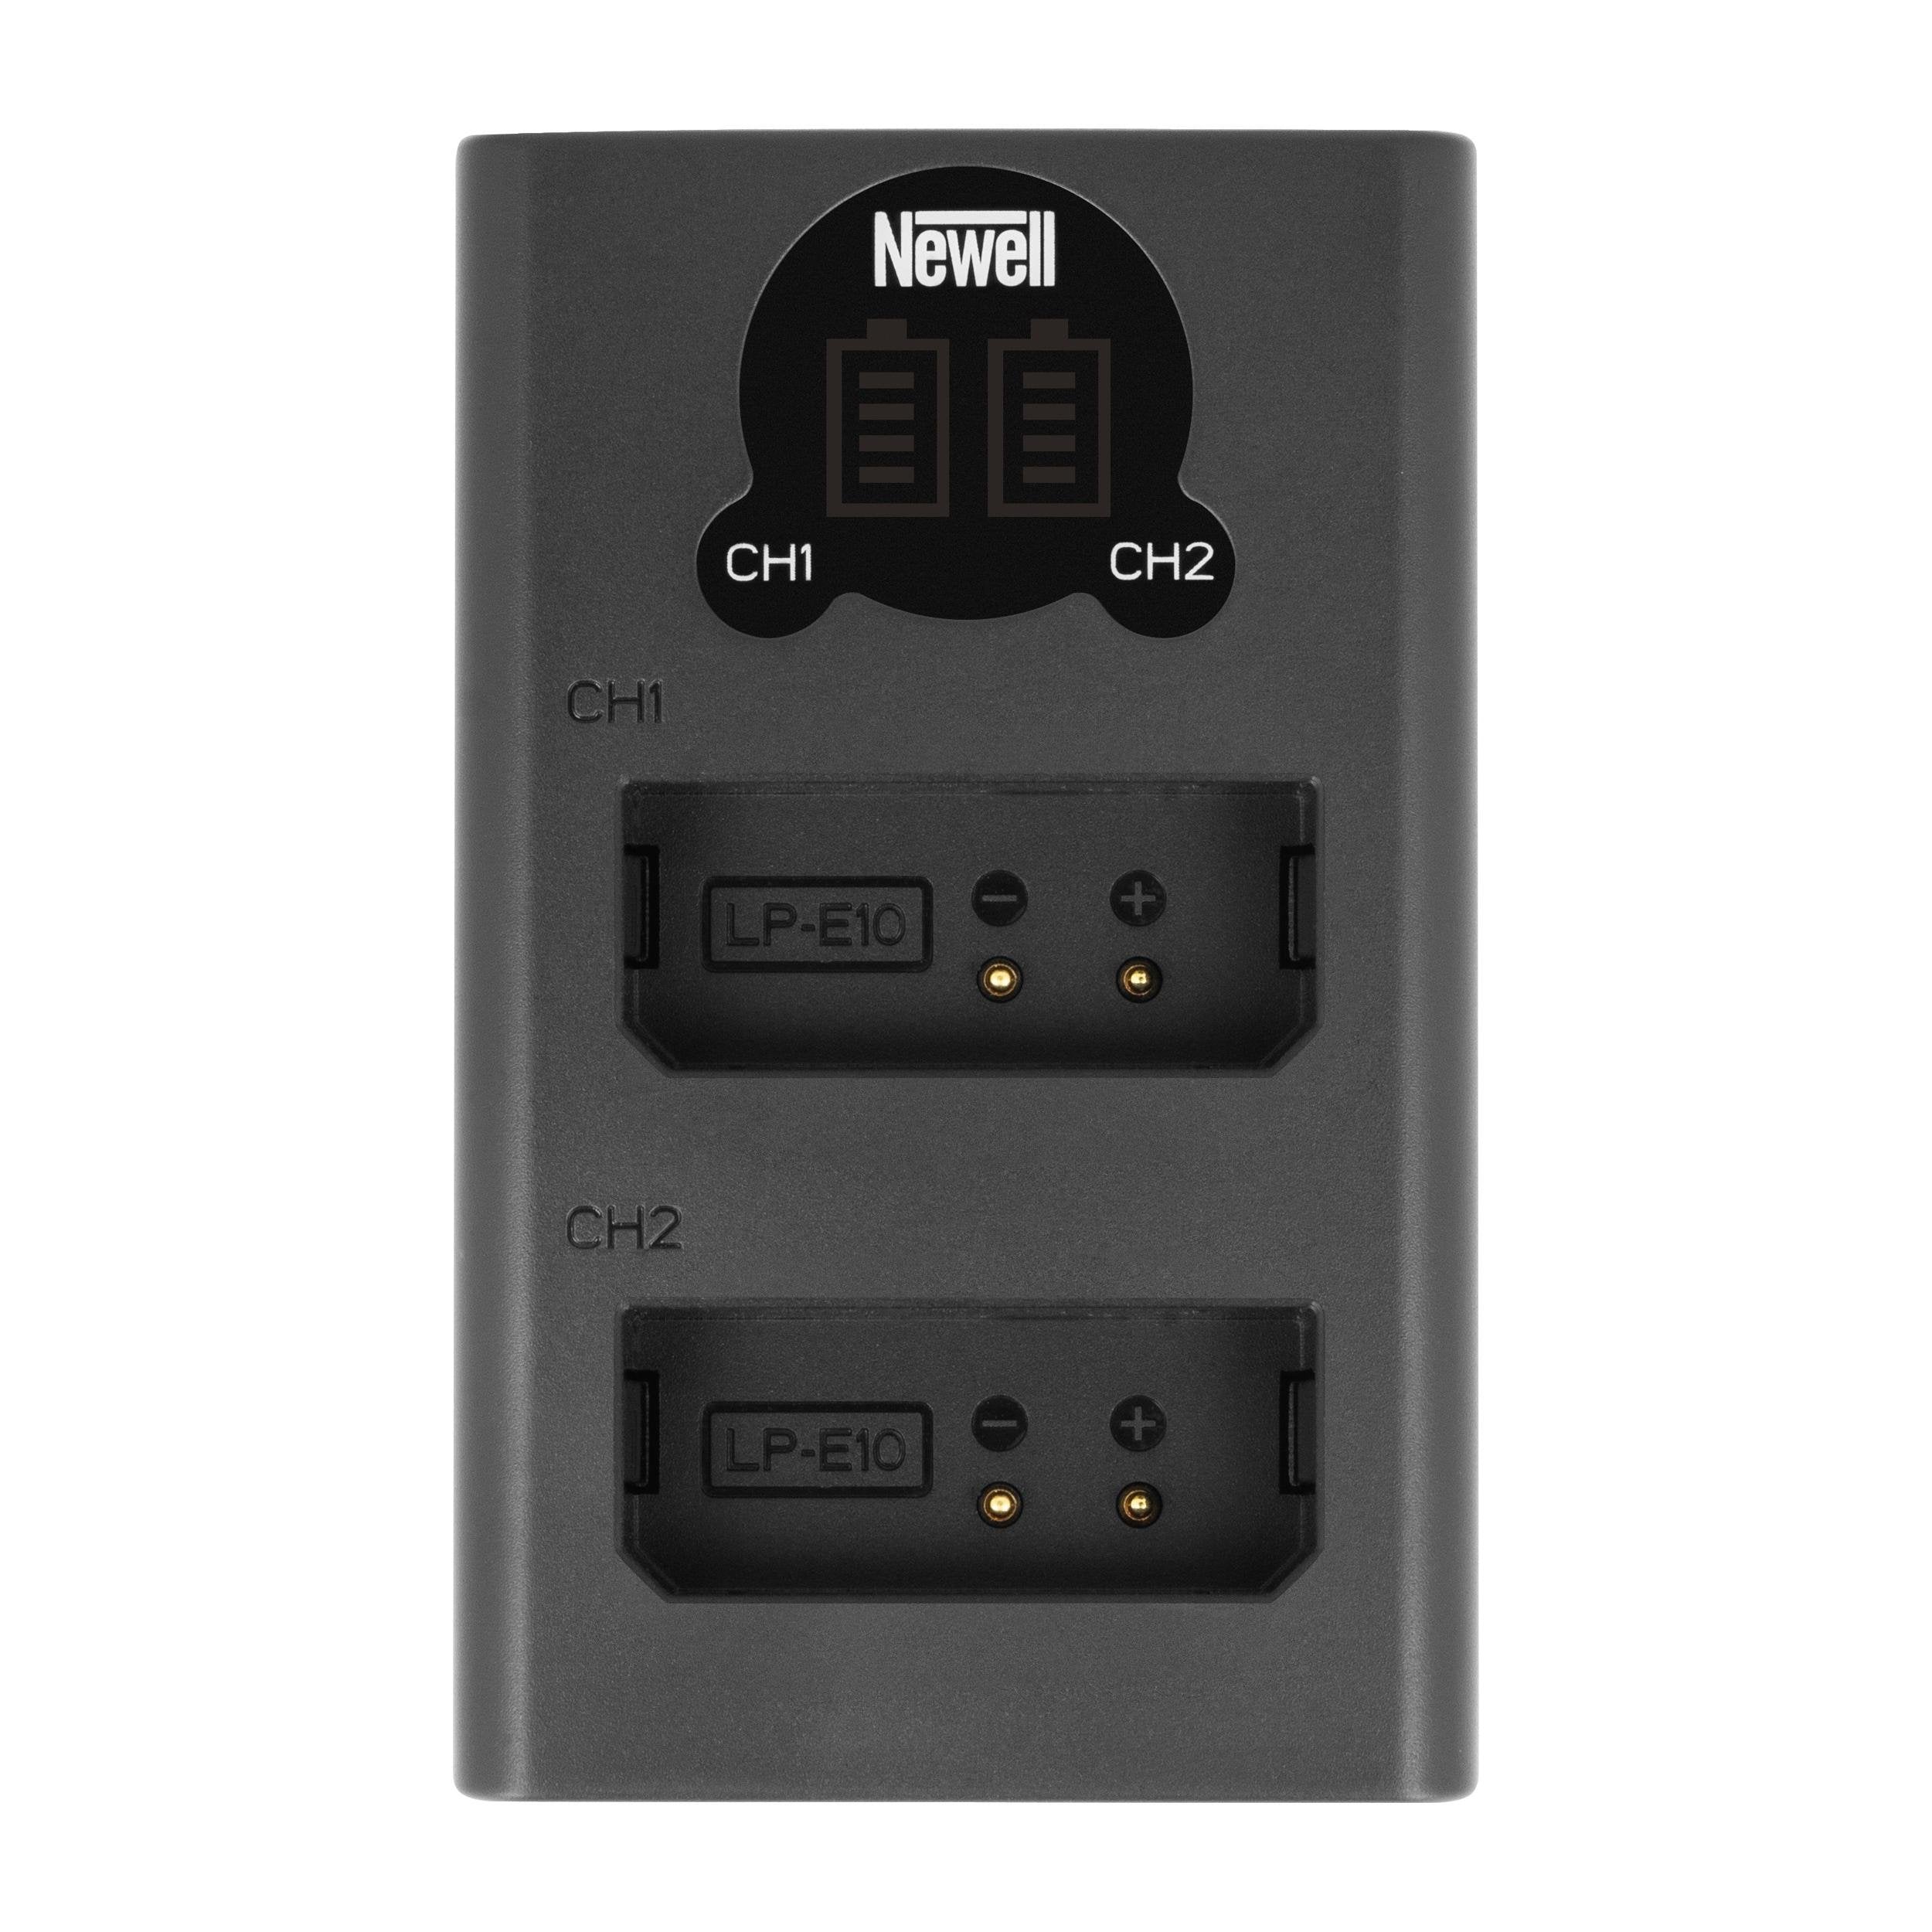 Newell DL-USB-C dual channel charger for LP-E10